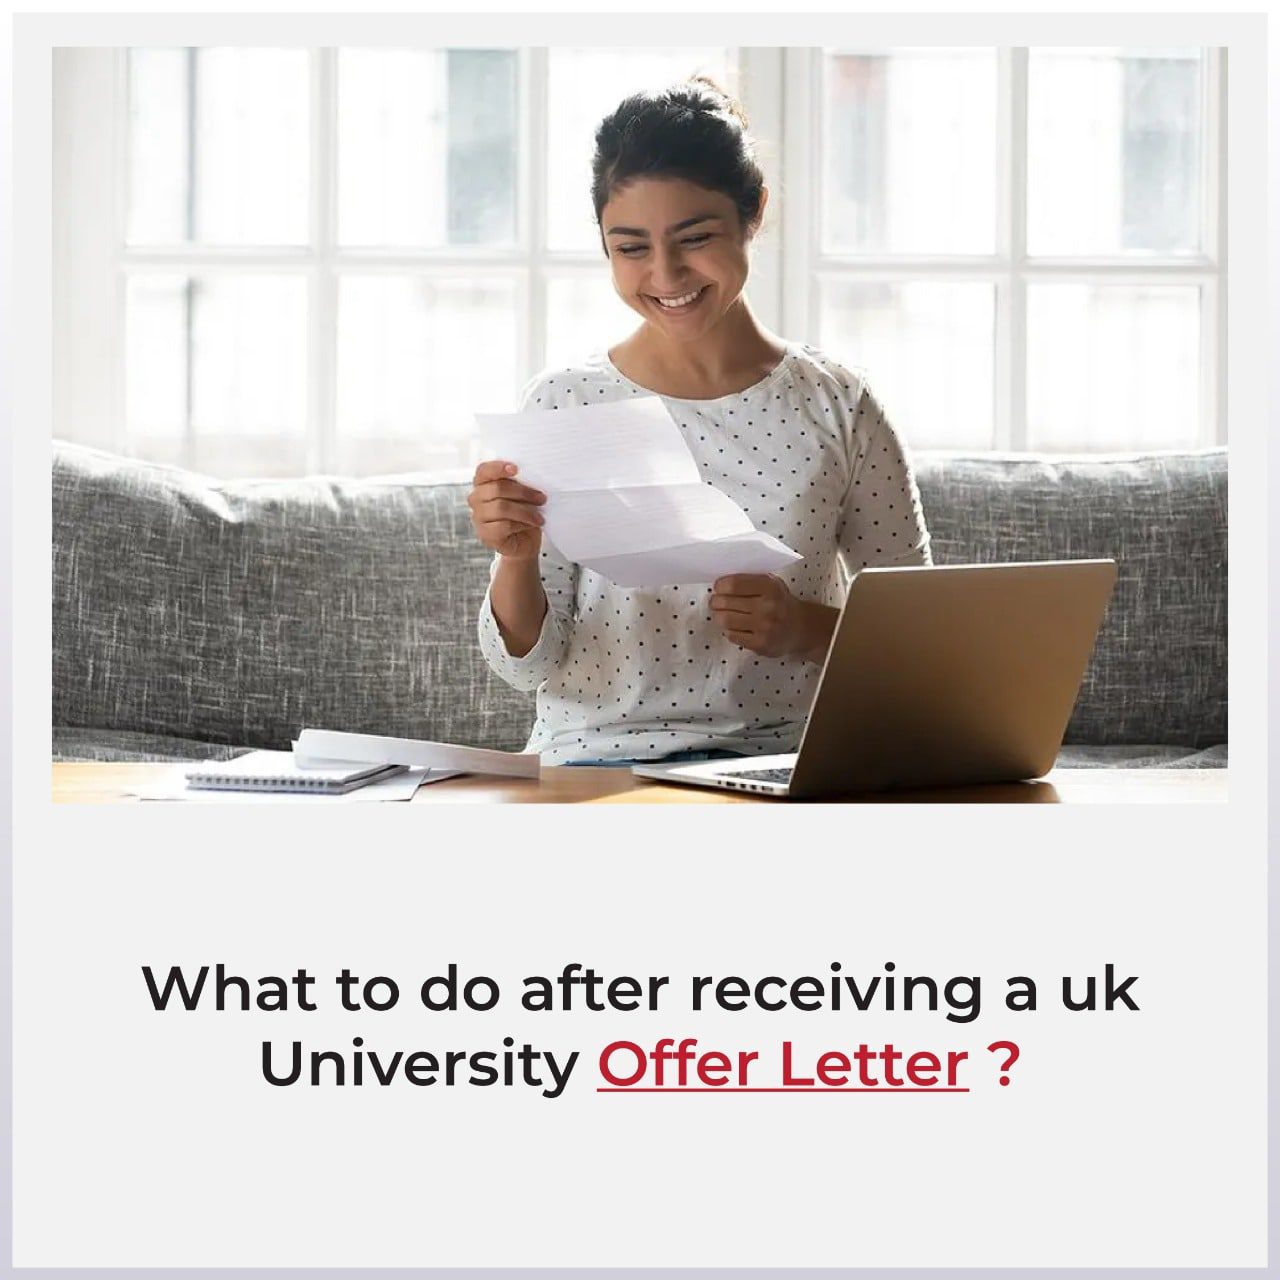 What to do after receiving a UK University offer letter?